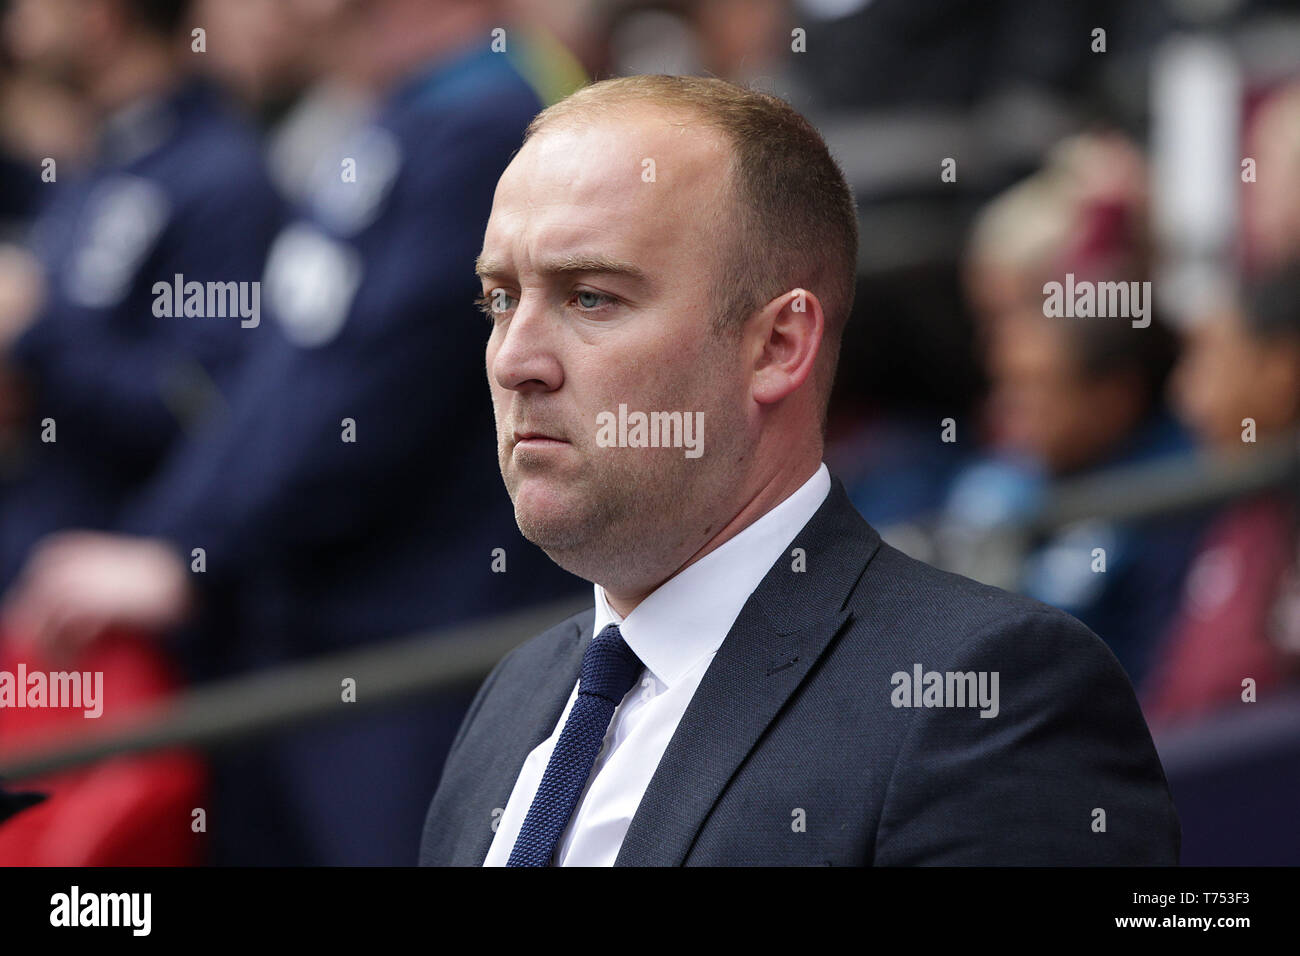 London, UK. 04th May, 2019. London, UK. 04th May, 2019. London, UK. 04th May, 2019. Manchester City Manager Nick Cushing during the FA Women's Cup Final match between Manchester City Women and West Ham United Ladies at Wembley Stadium on May 4th 2019 in London, England. (Credit: PHC Images/Alamy Live News Credit: PHC Images/Alamy Live News Credit: PHC Images/Alamy Live News Stock Photo